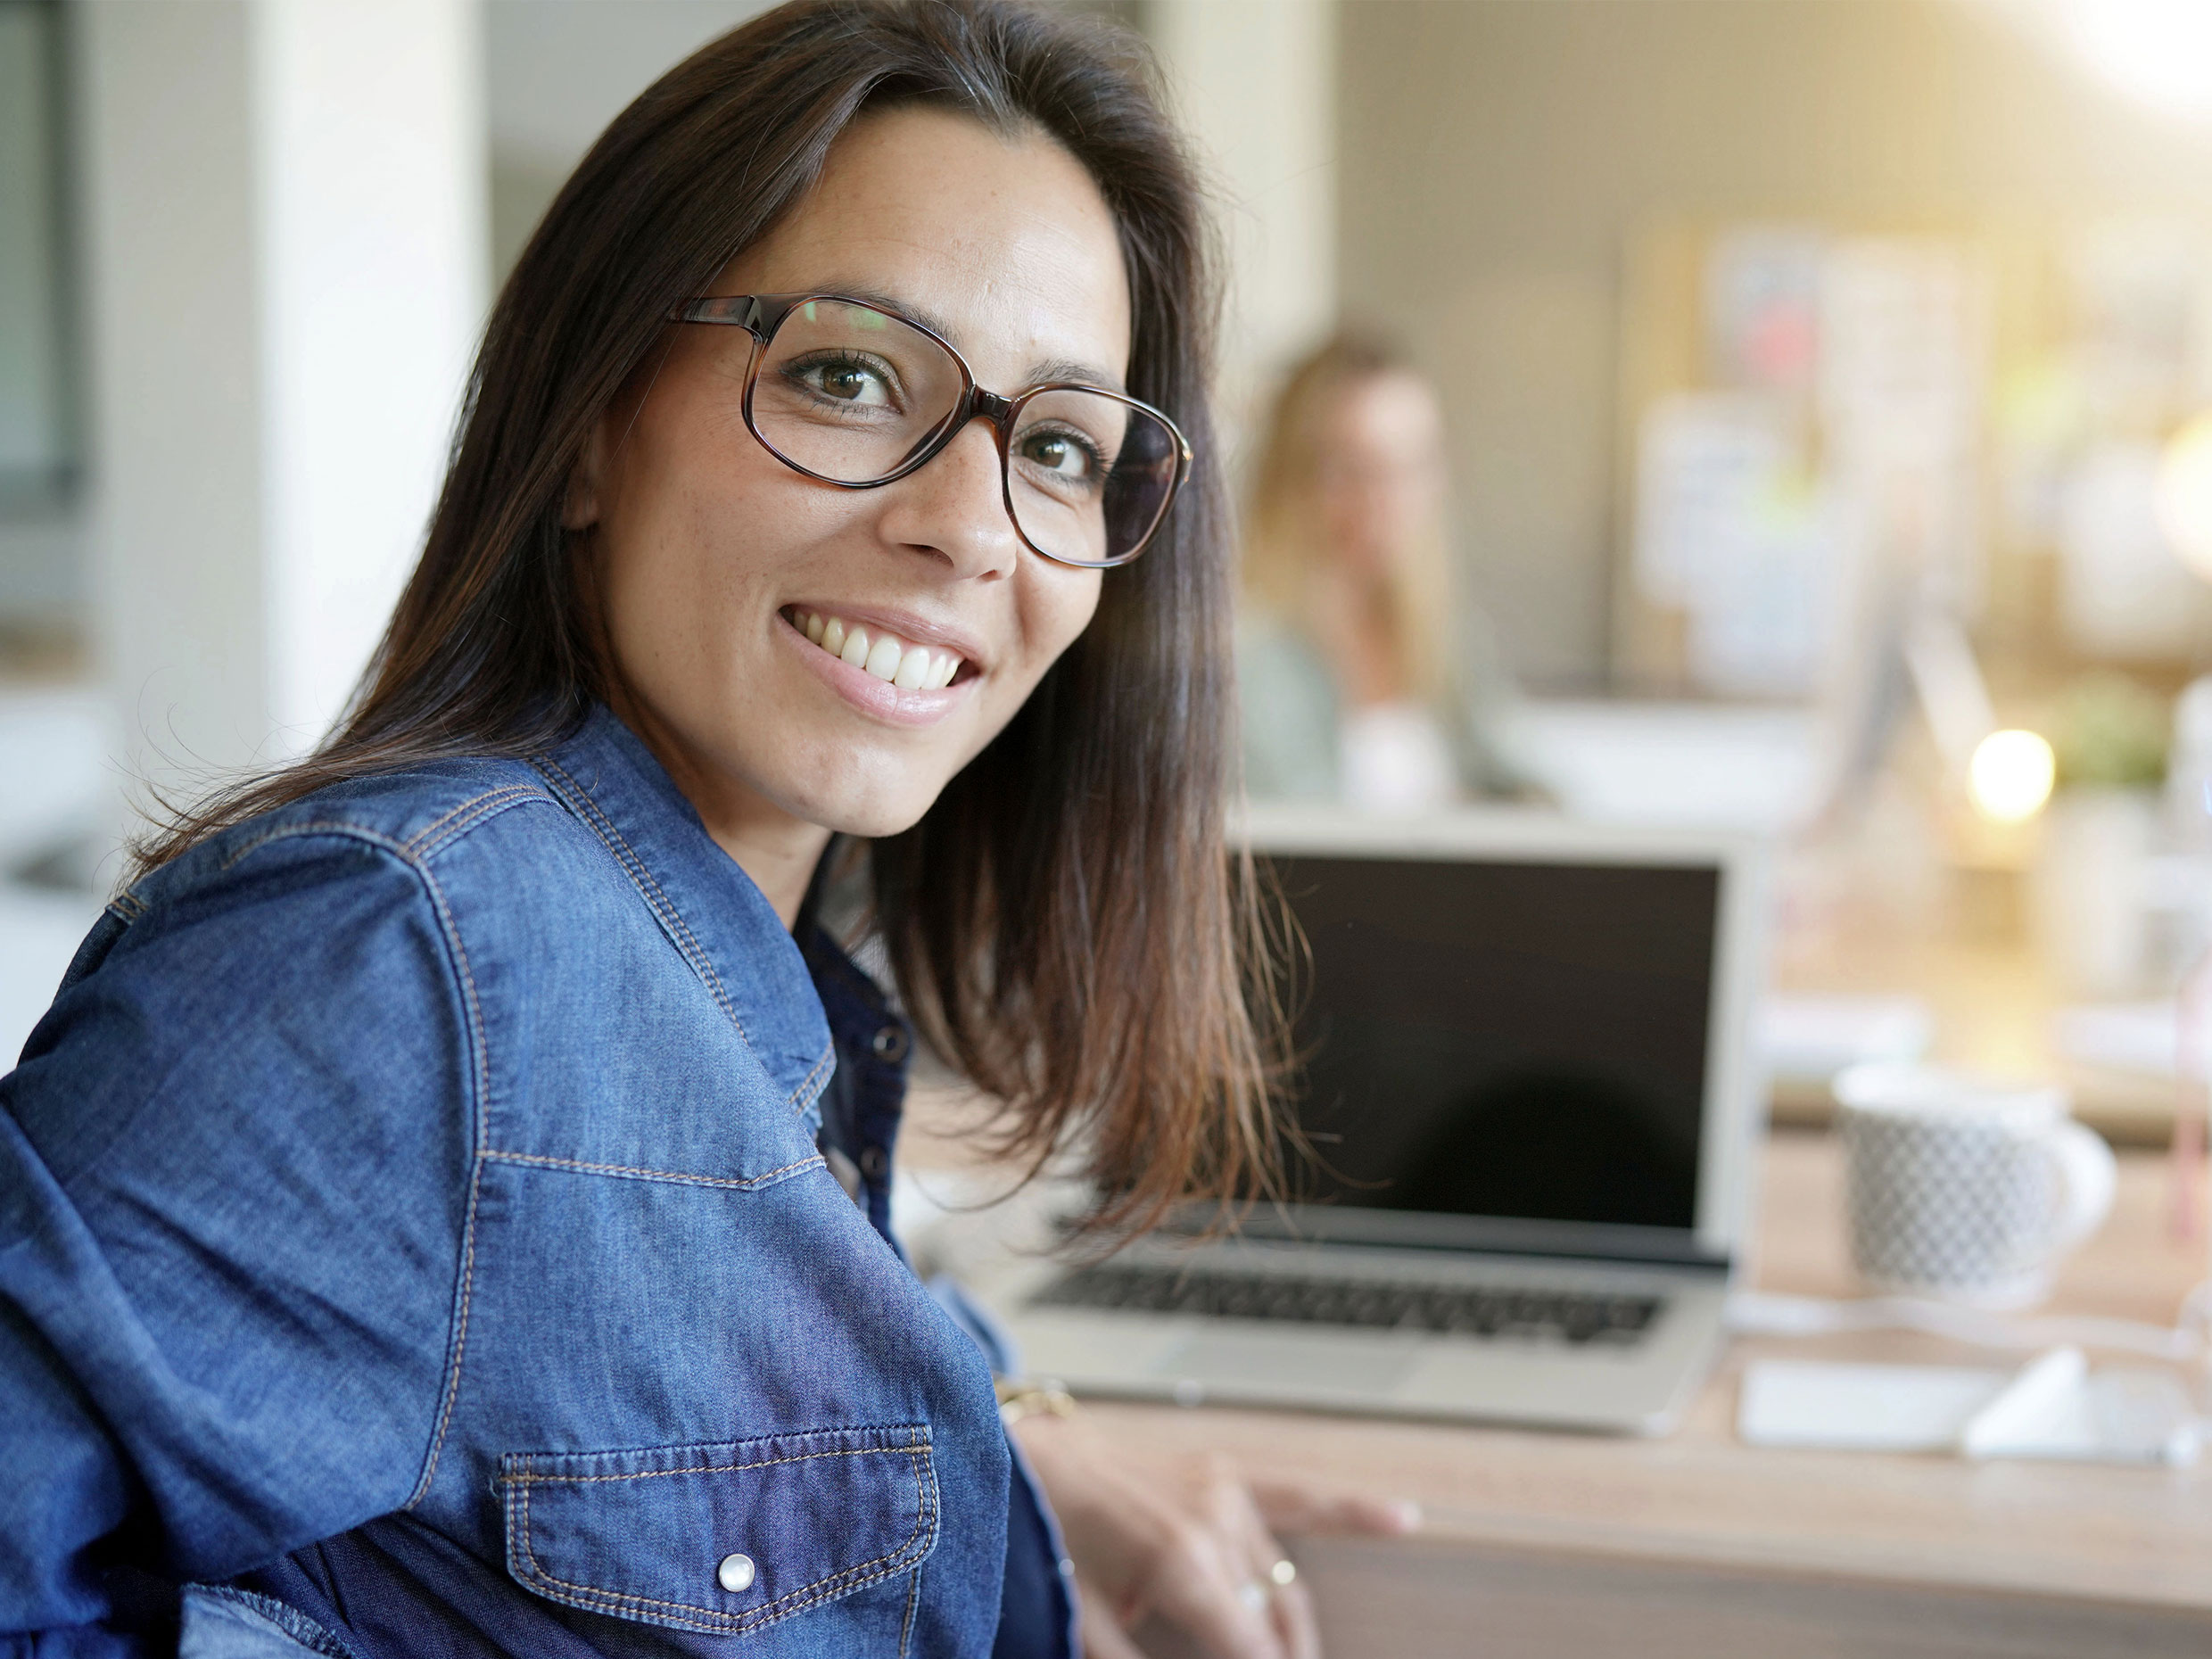 40-something woman in glasses smiling while looking over shoulder with laptop in background